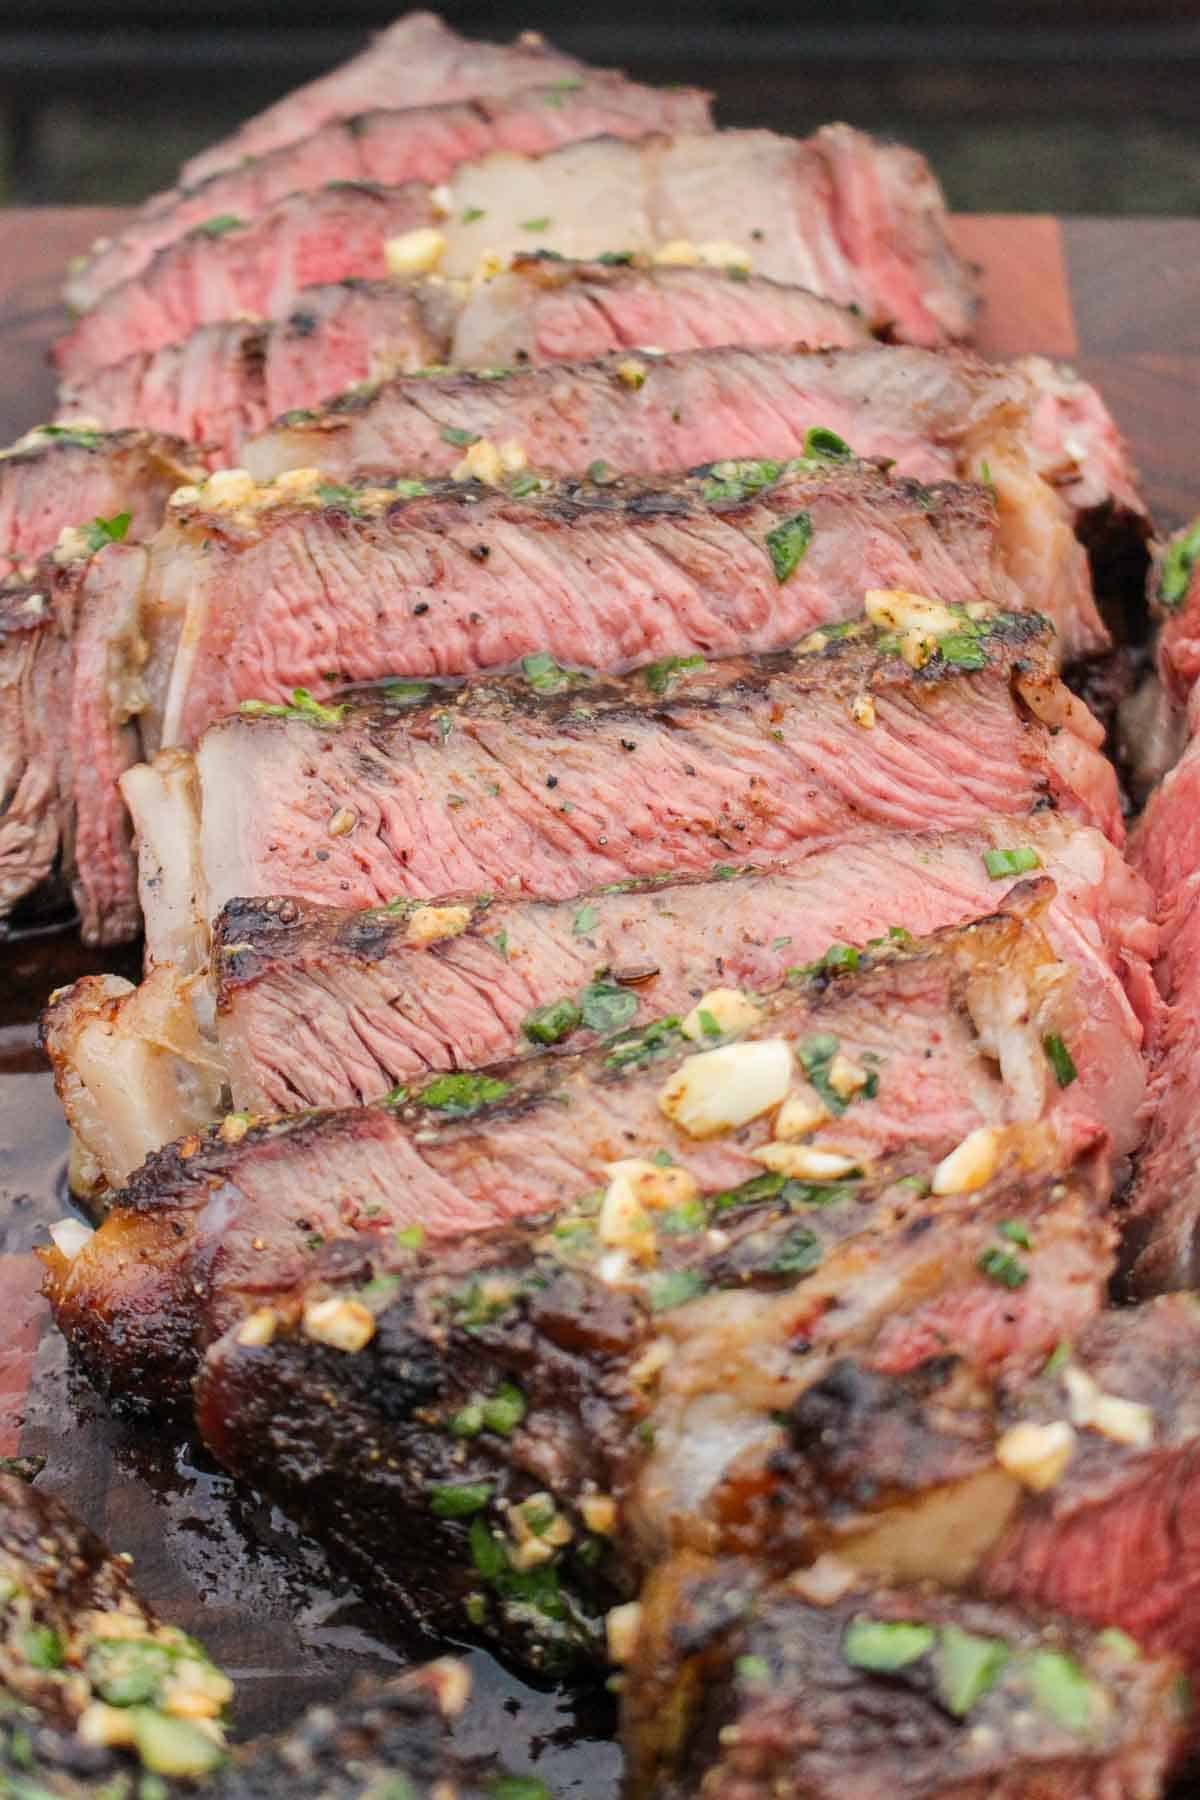 A close up of the sliced grilled ribeye with cowboy butter.